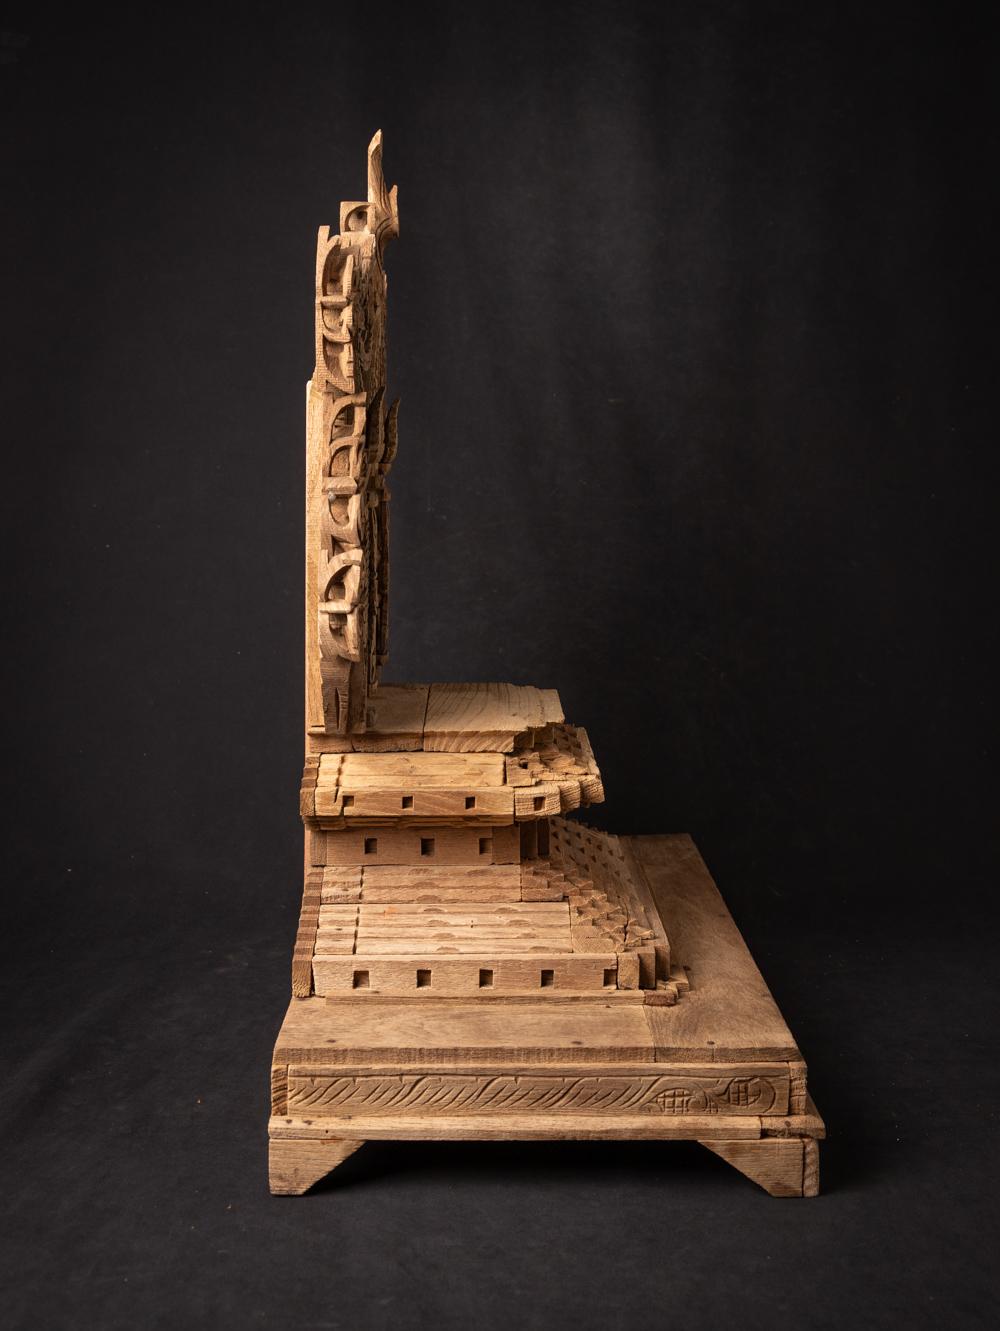 Old wooden Burmese throne

Step into a realm of timeless grandeur with this magnificent antique Burmese throne. Crafted from the finest wood and adorned, it exudes an aura of regal opulence. Standing at an impressive height of 66.2 cm, with